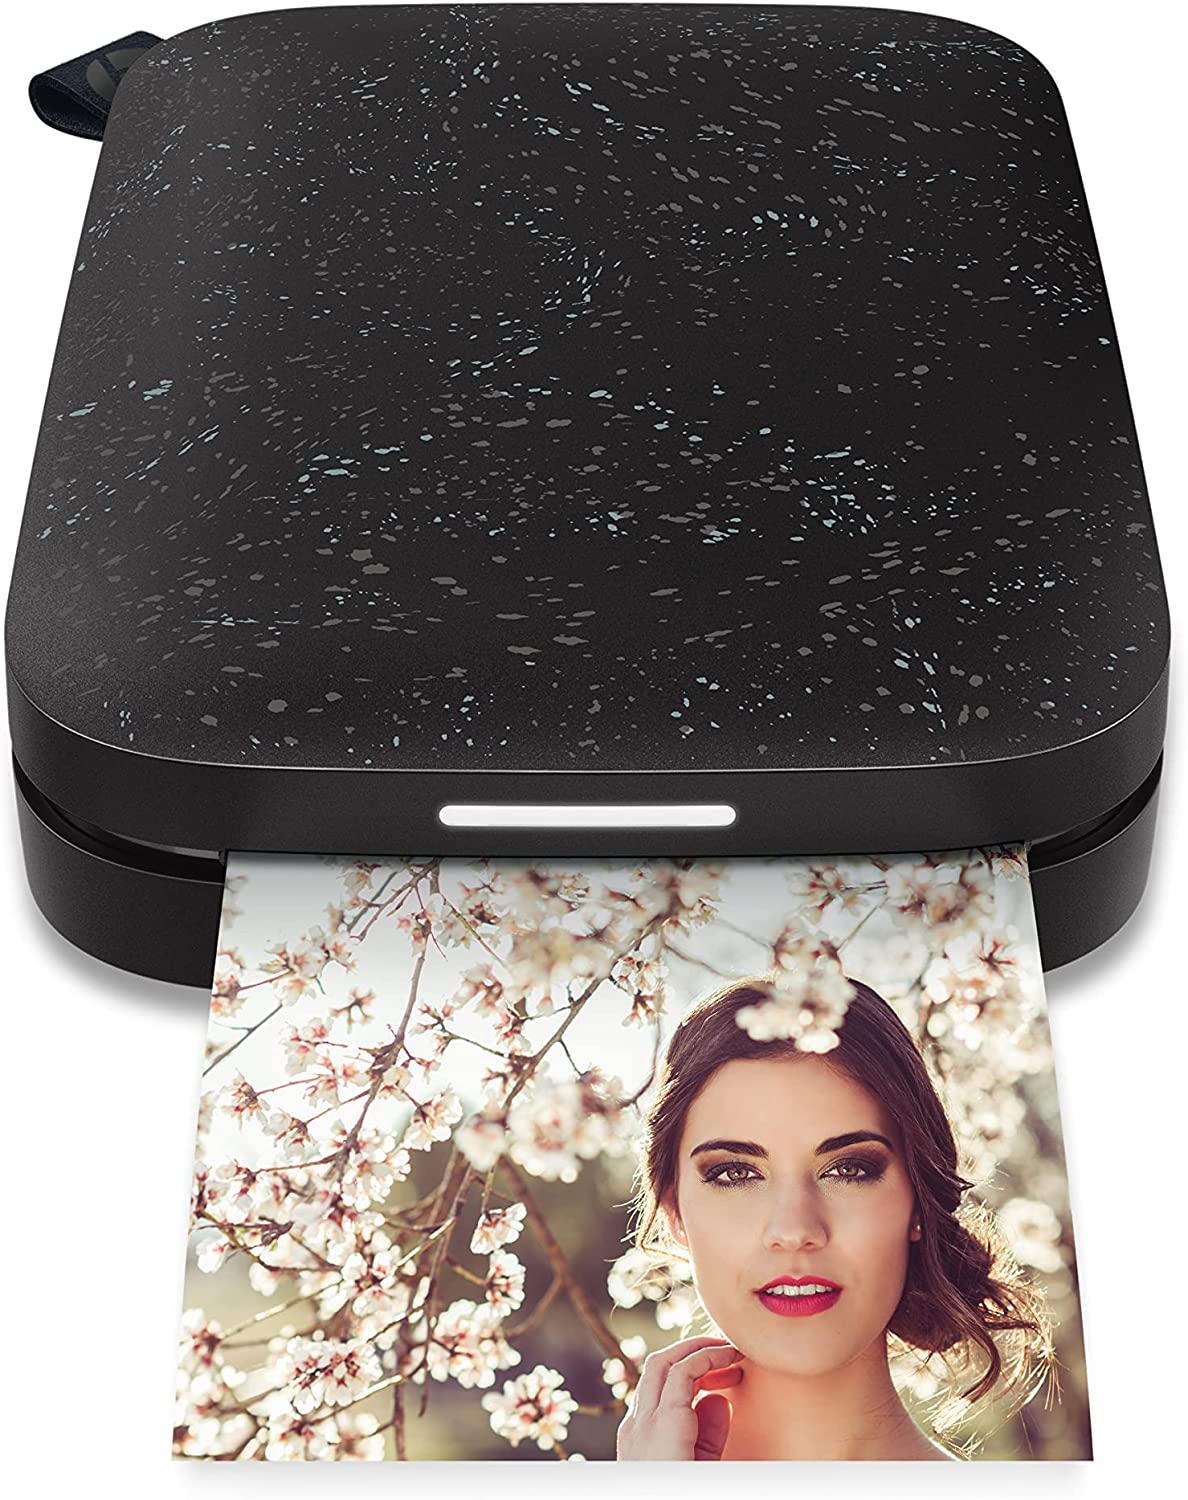 HP Sprocket Portable Photo Printer (Noir) – Instantly Print 2x3”  Sticky-backed Photos from Your Phone 